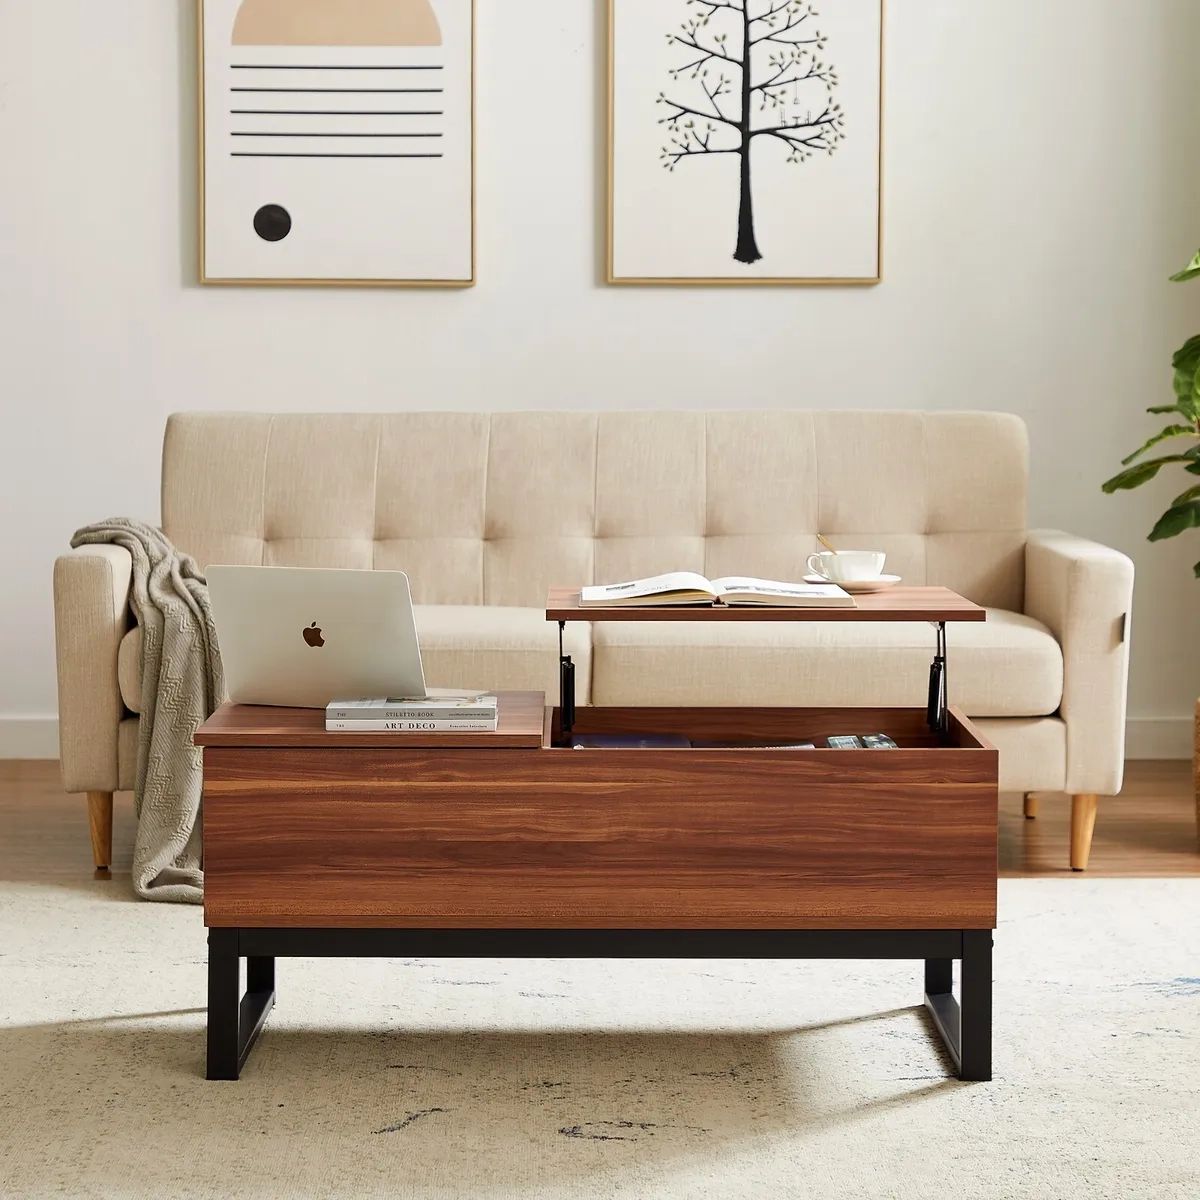 Wood Lift Top Coffee Table For Living Room,Small Coffee Table With Storage  Brown | Ebay Pertaining To Wood Lift Top Coffee Tables (Photo 7 of 15)